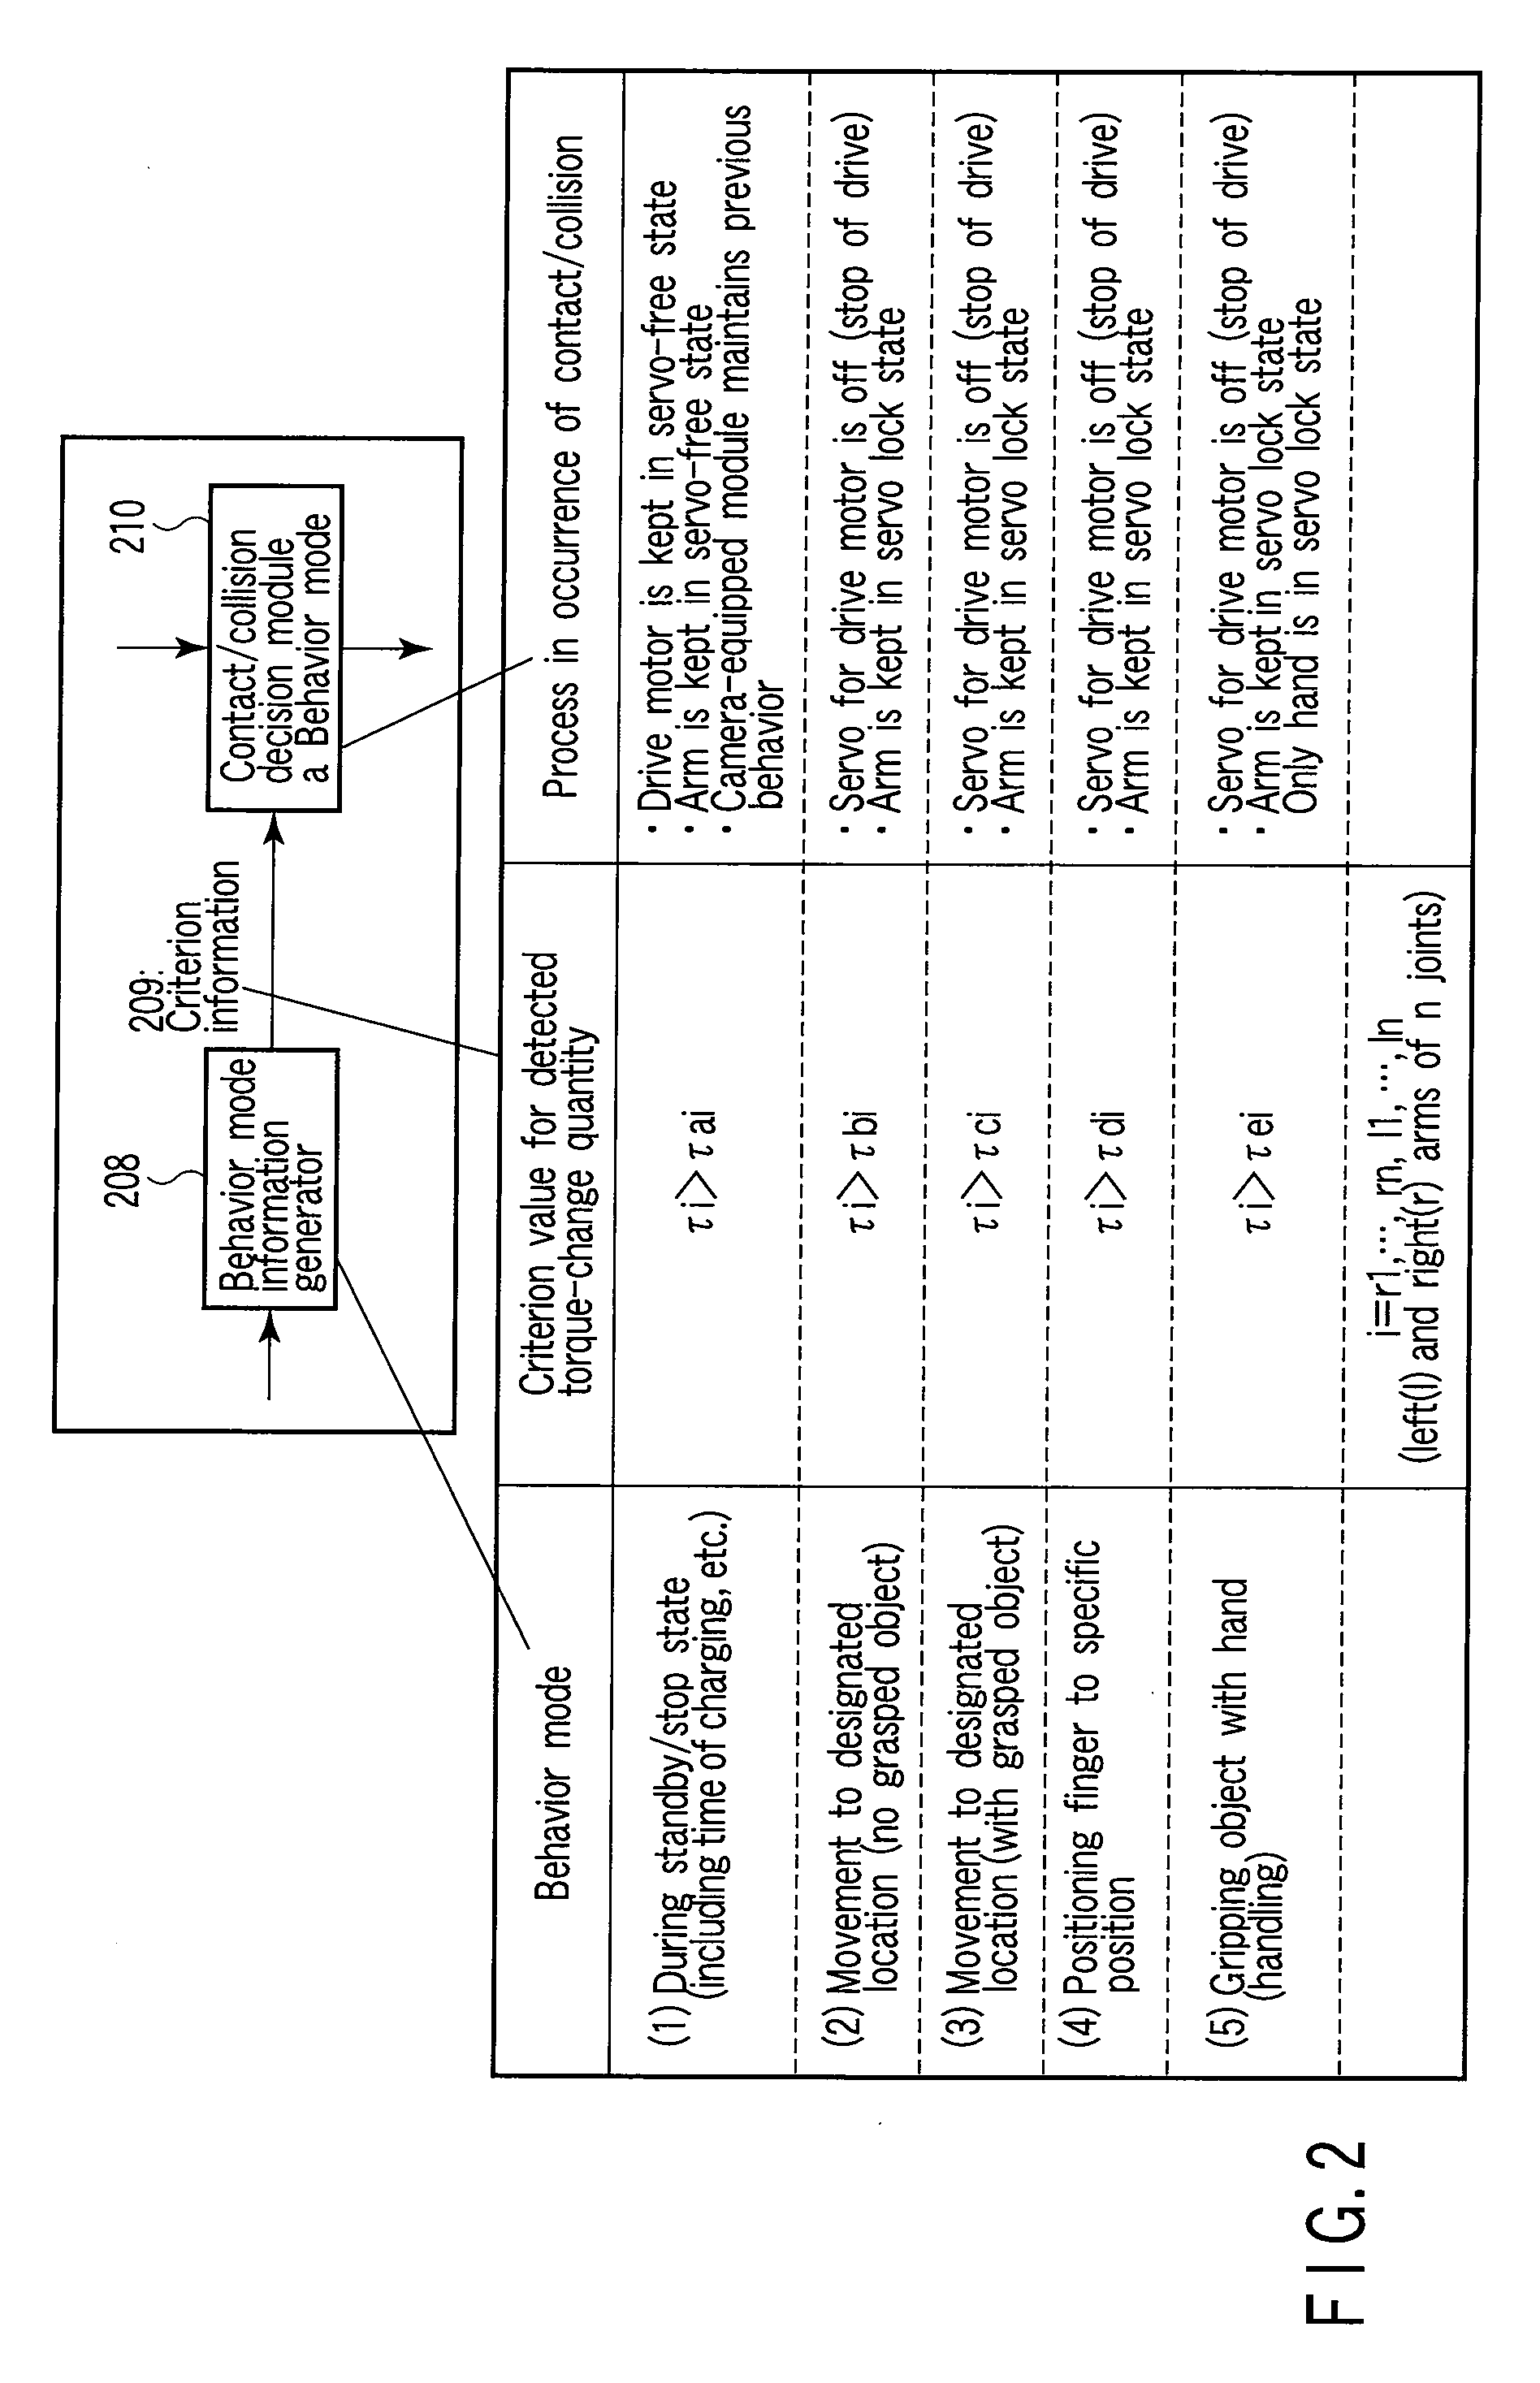 Arm-equipped mobile robot and method for controlling the same